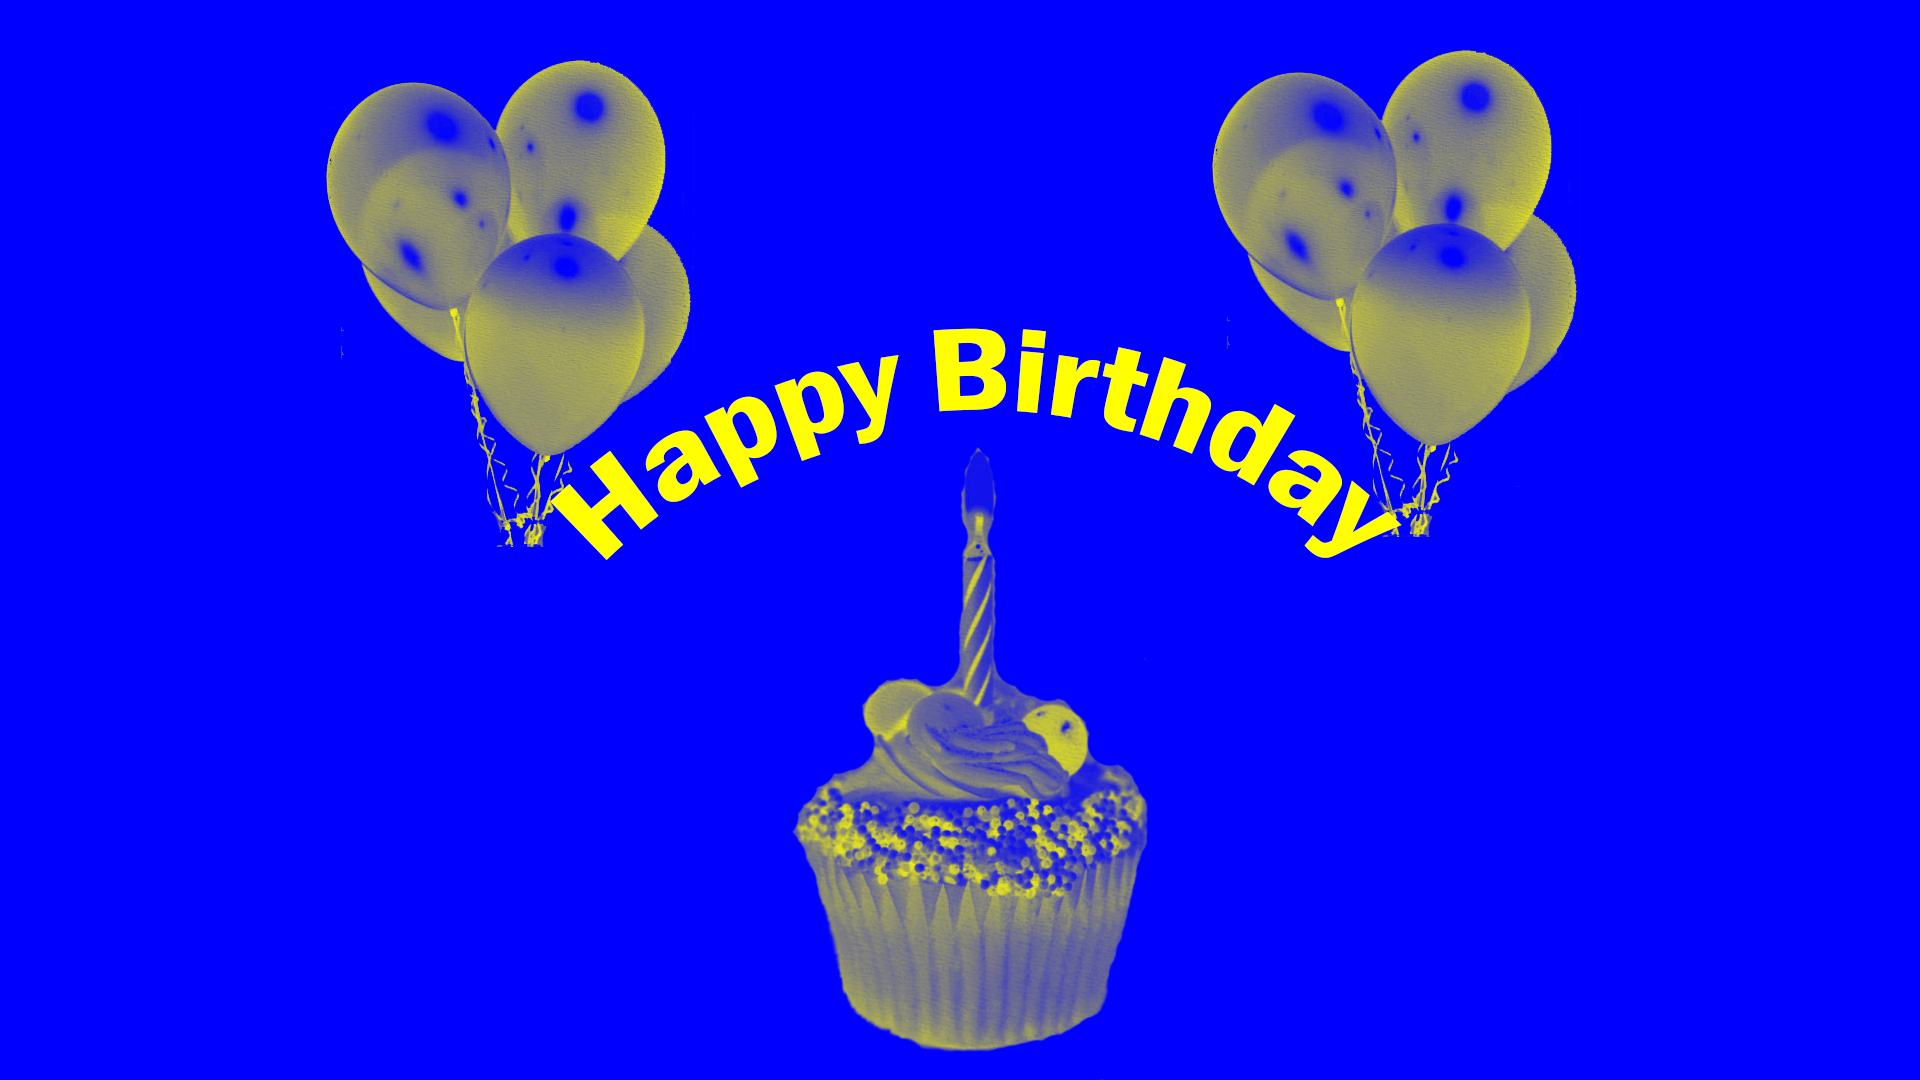 Download Happy Birthday GIF Images & Cards - 9to5 Car Wallpapers